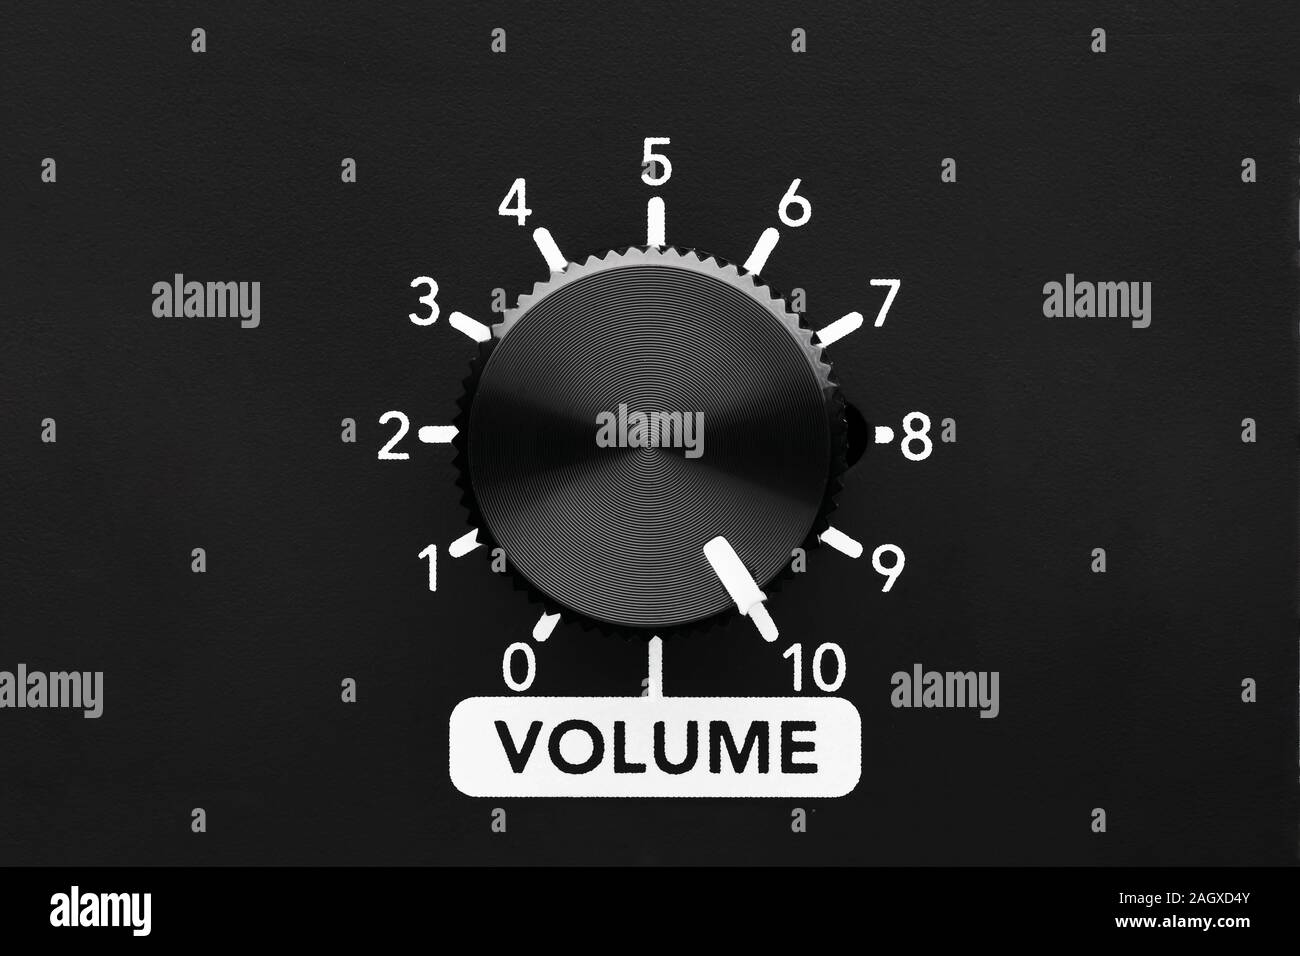 Volume control knob of a black amplifier on maximum loudness. Close up view with copy space. Stock Photo